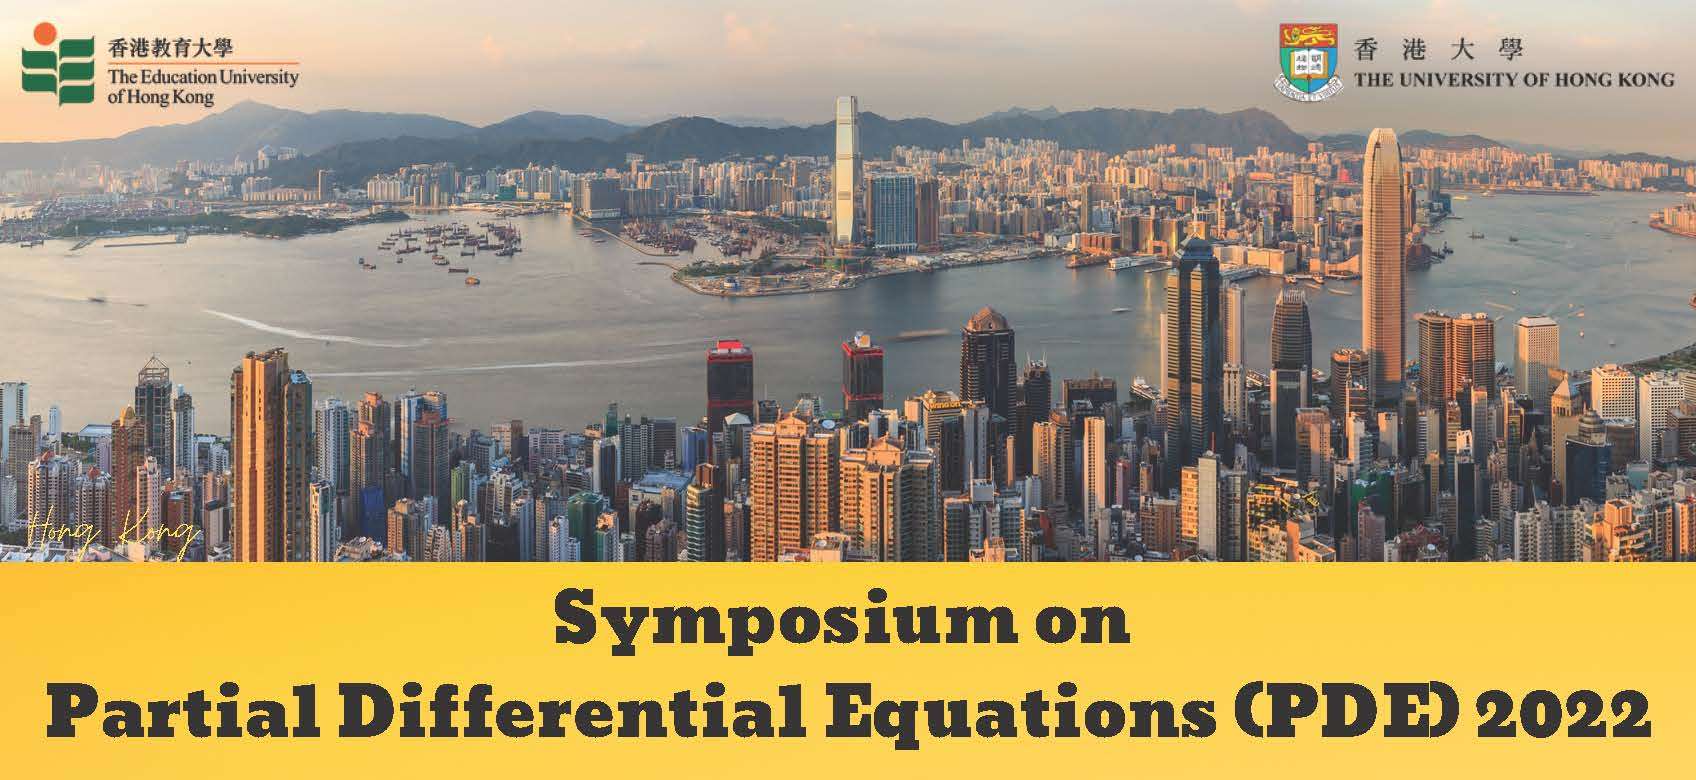 Symposium on Partial Differential Equations (PDE) 2022